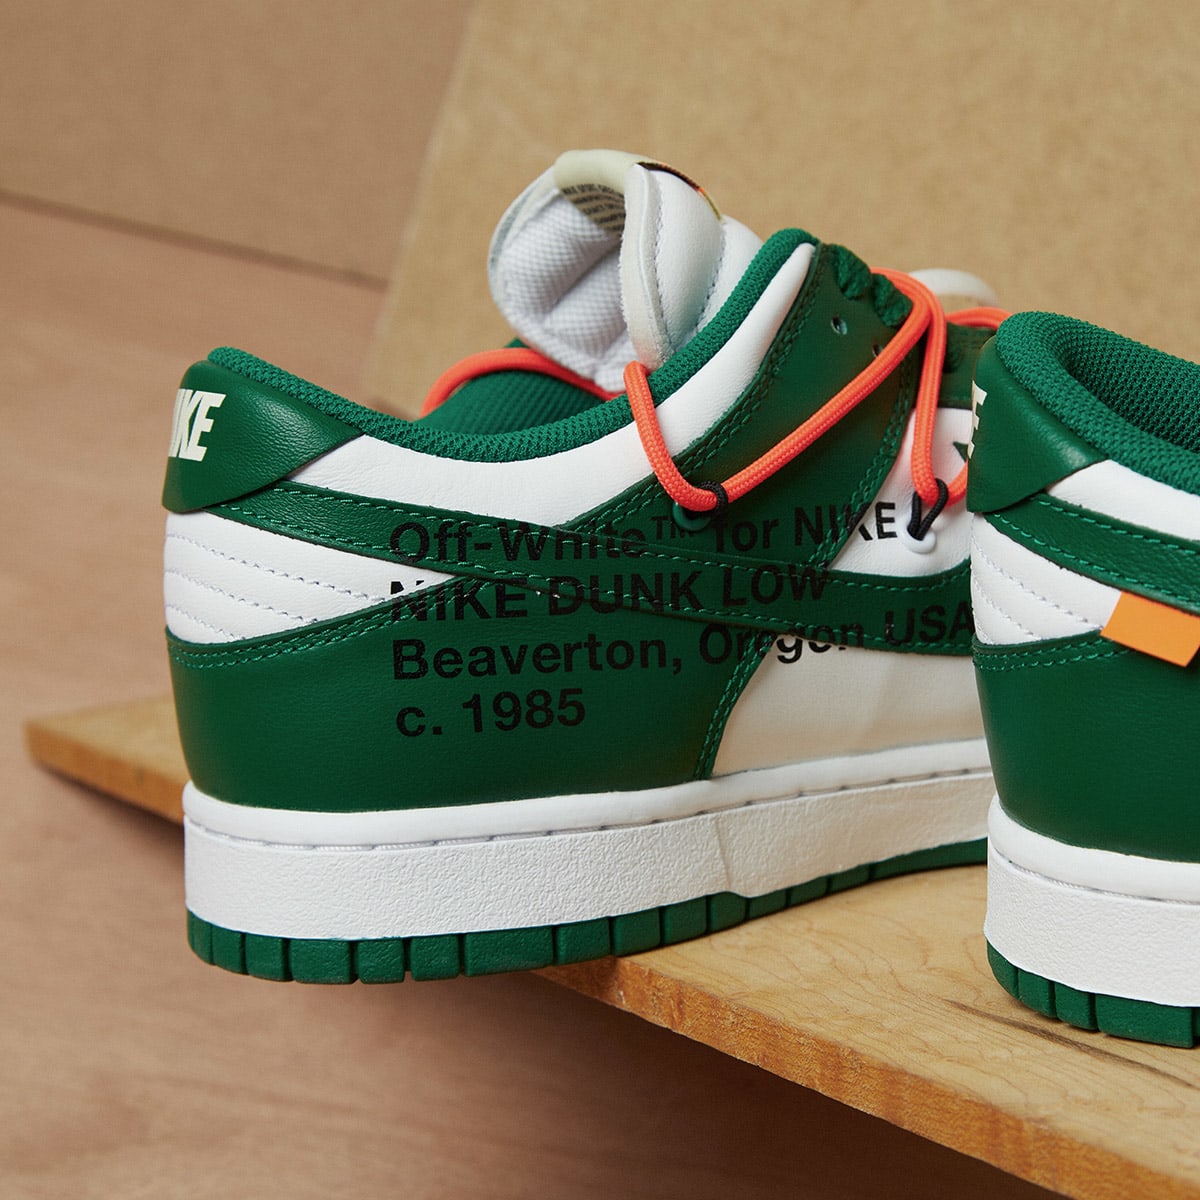 off white low dunks green